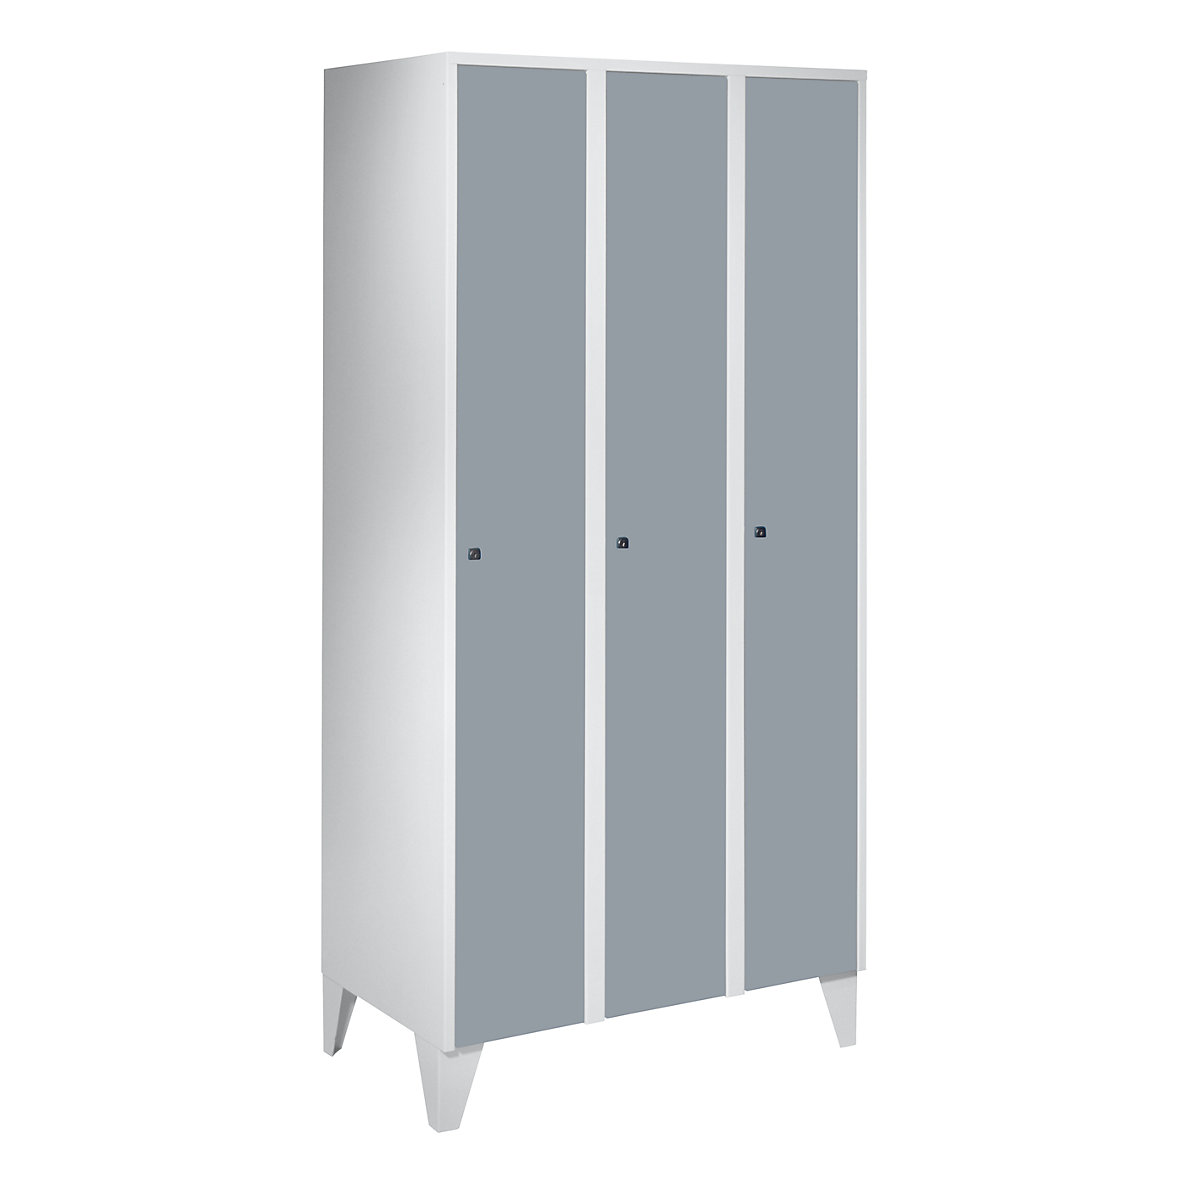 Cloakroom locker with feet – Wolf, HxWxD 1850 x 900 x 500 mm, 3 compartments, silver grey-3